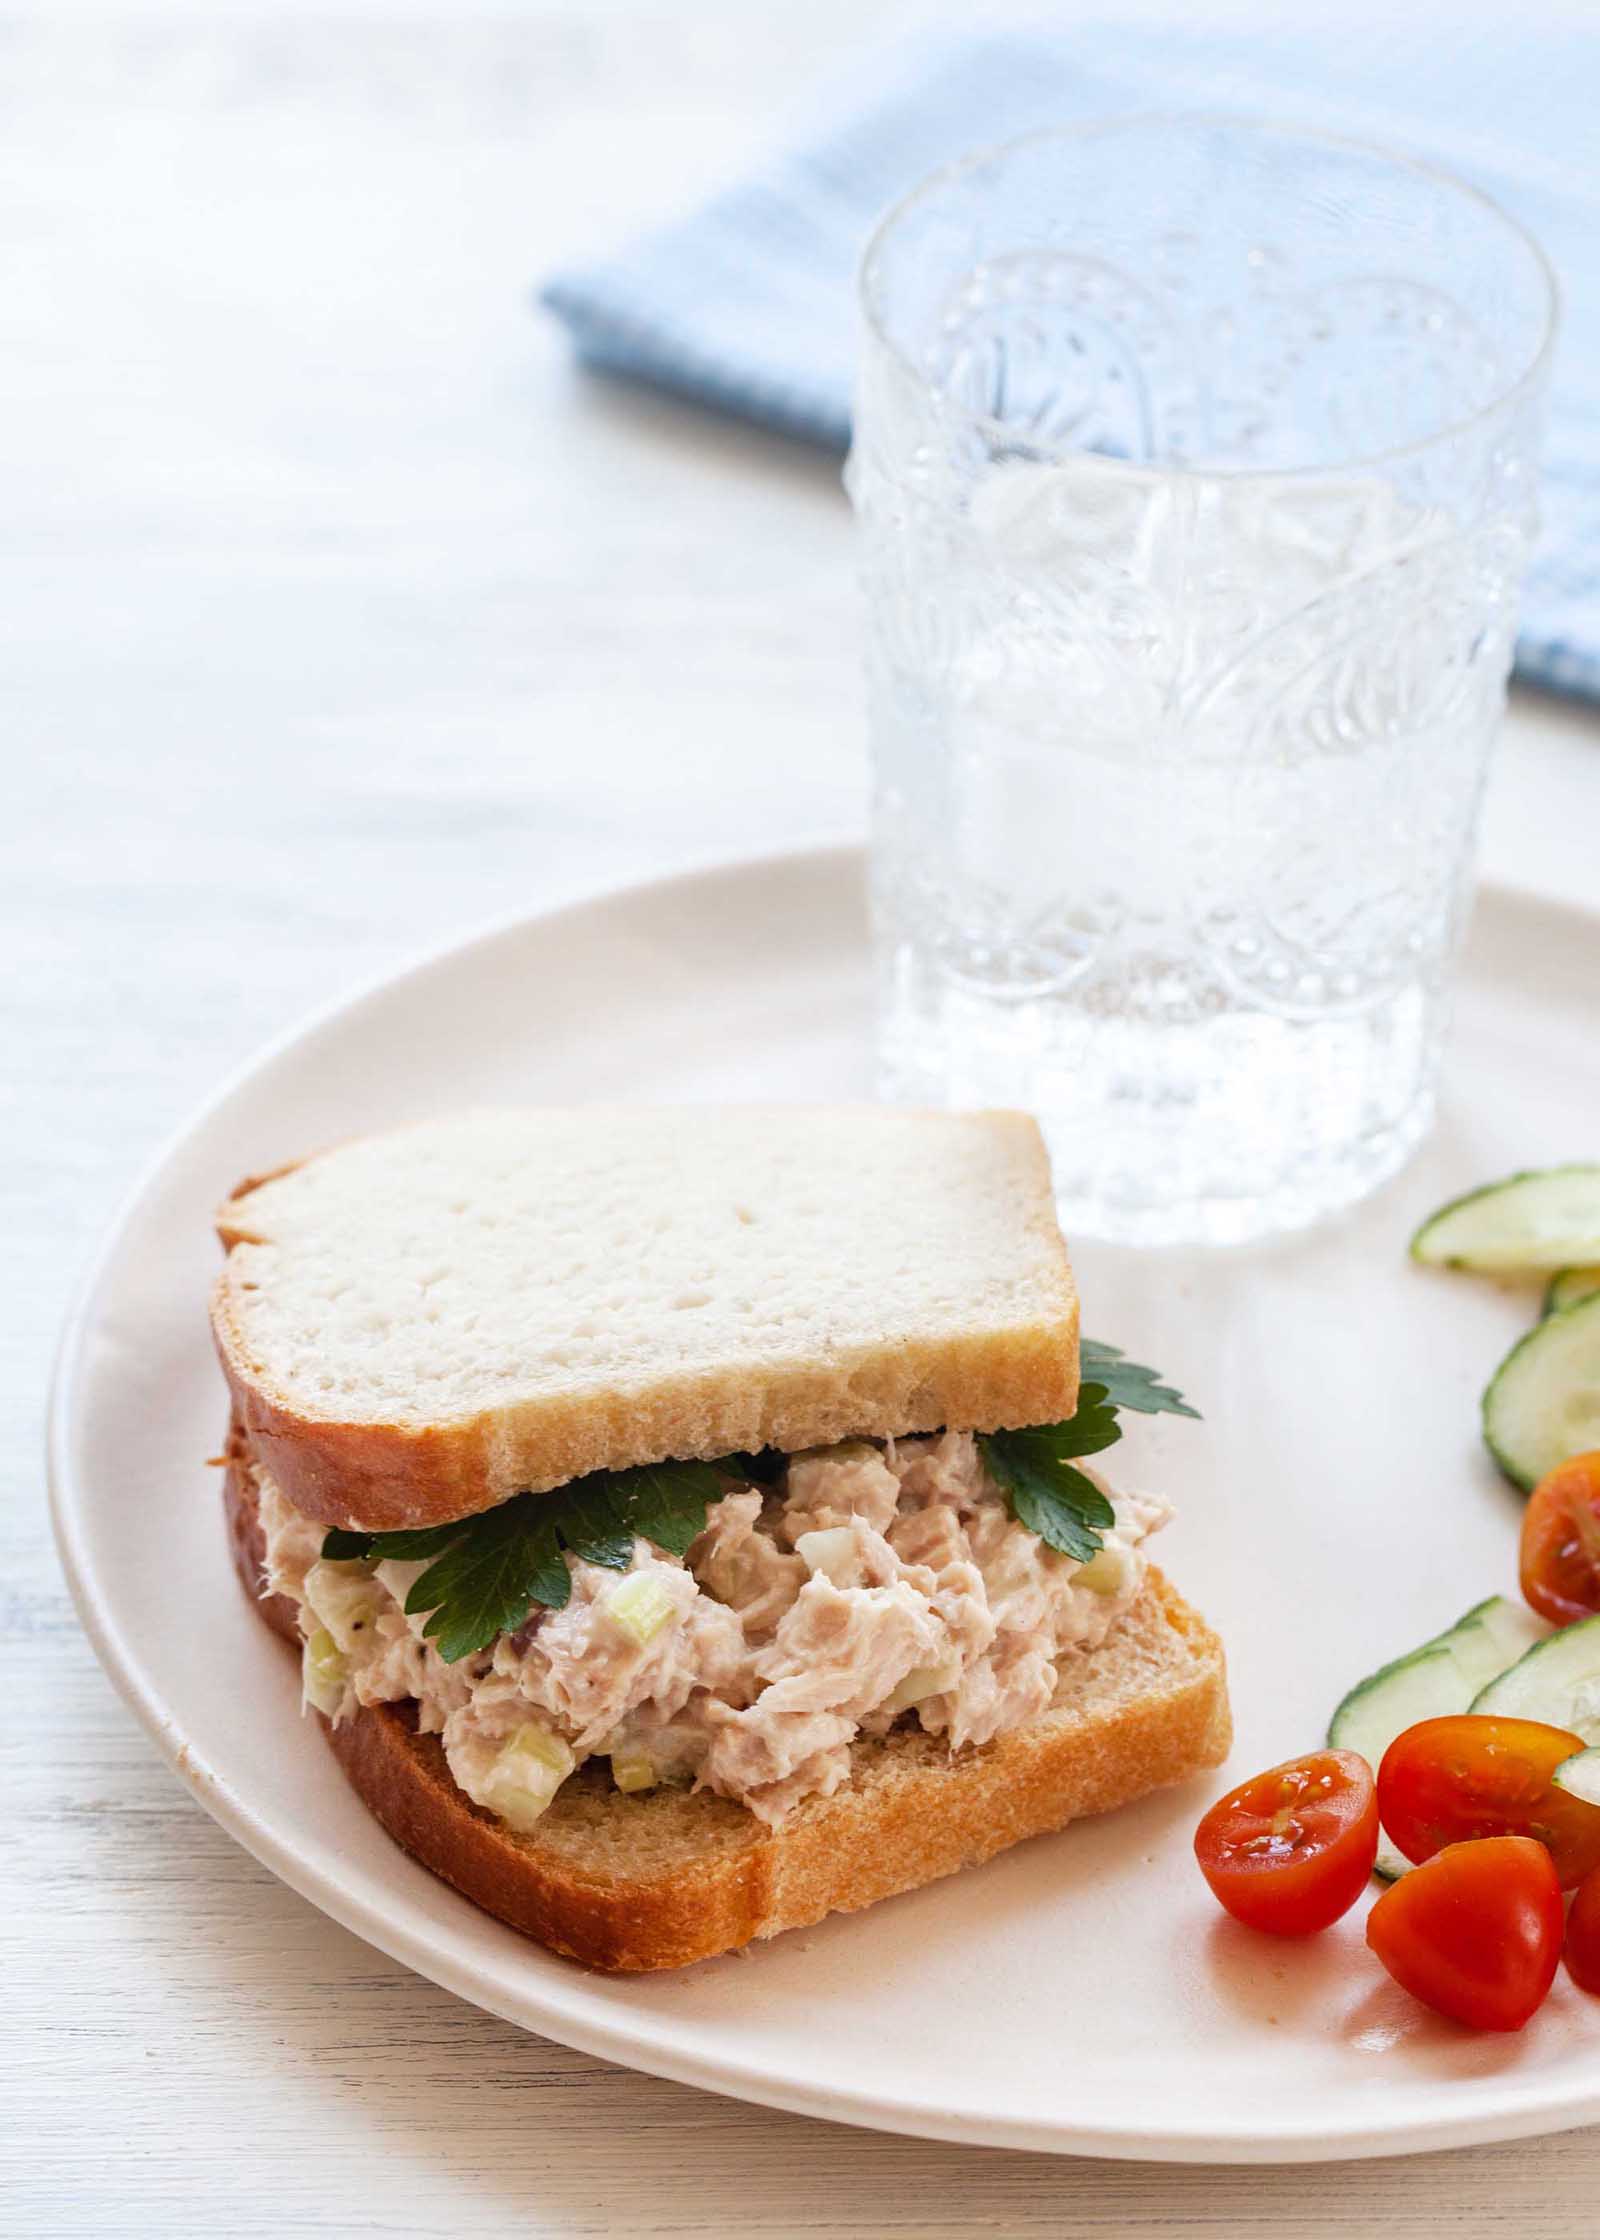 White bread with quick and easy tuna salad inside. A glass of water, sliced cucumbers and halved tomatoes are also on the plate.